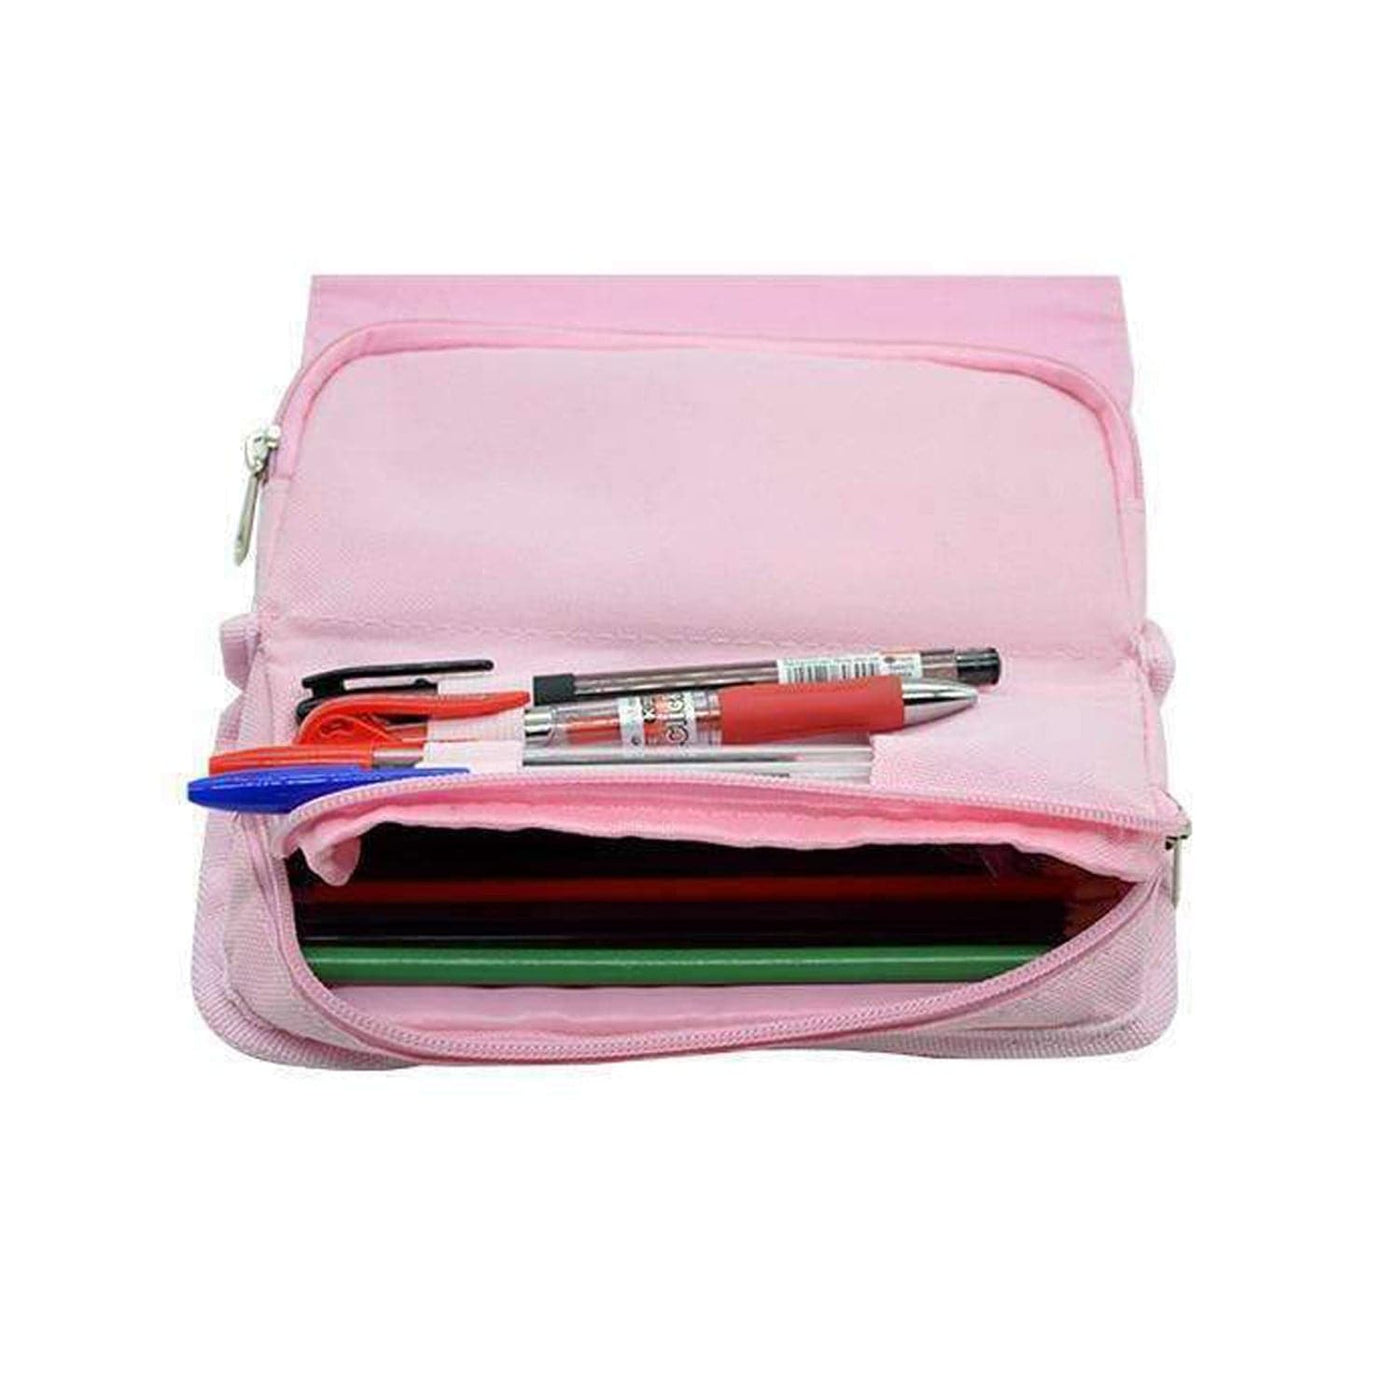 Pink Locket And Key - Valentine's Day Pencil Case